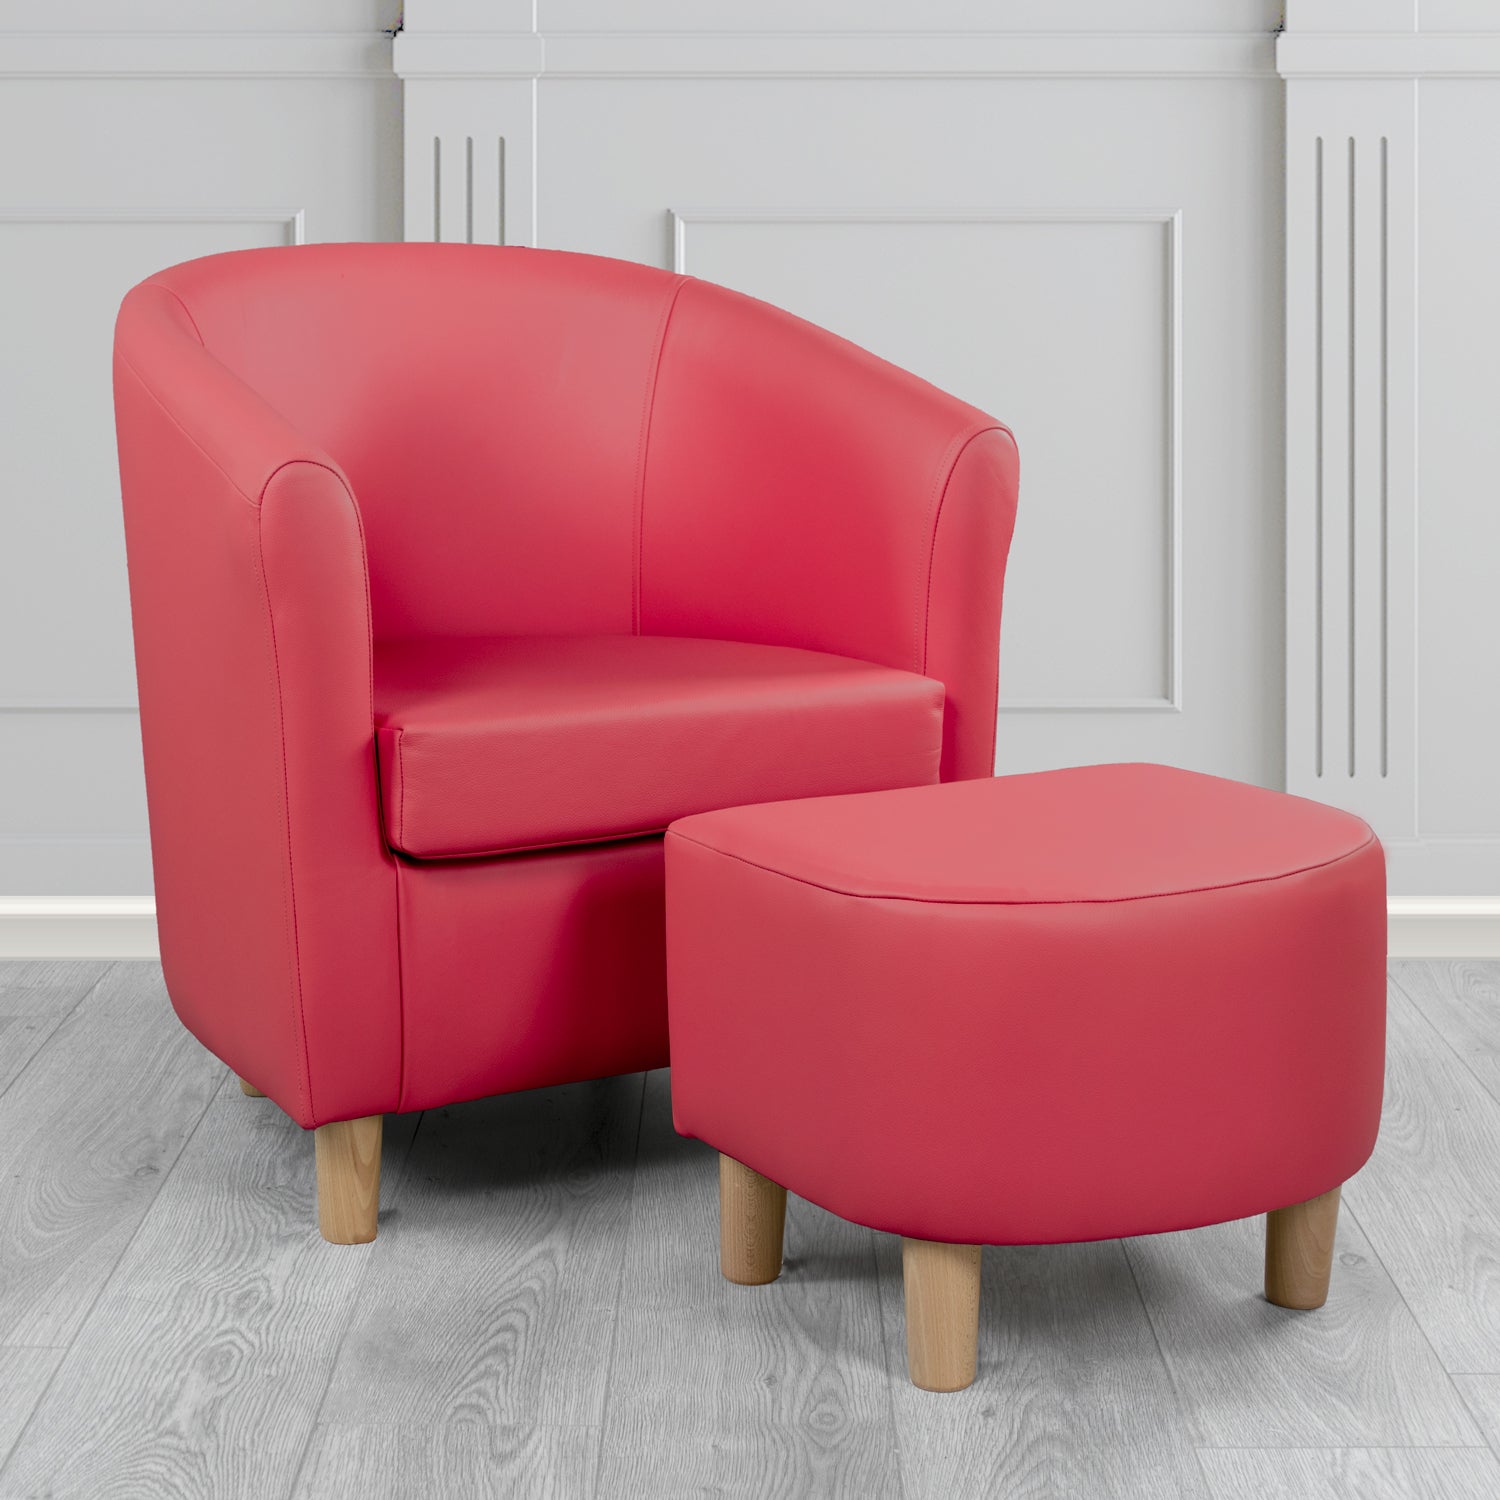 Tuscany Shelly Velvet Red Crib 5 Genuine Leather Tub Chair & Footstool Set (6617234473002)